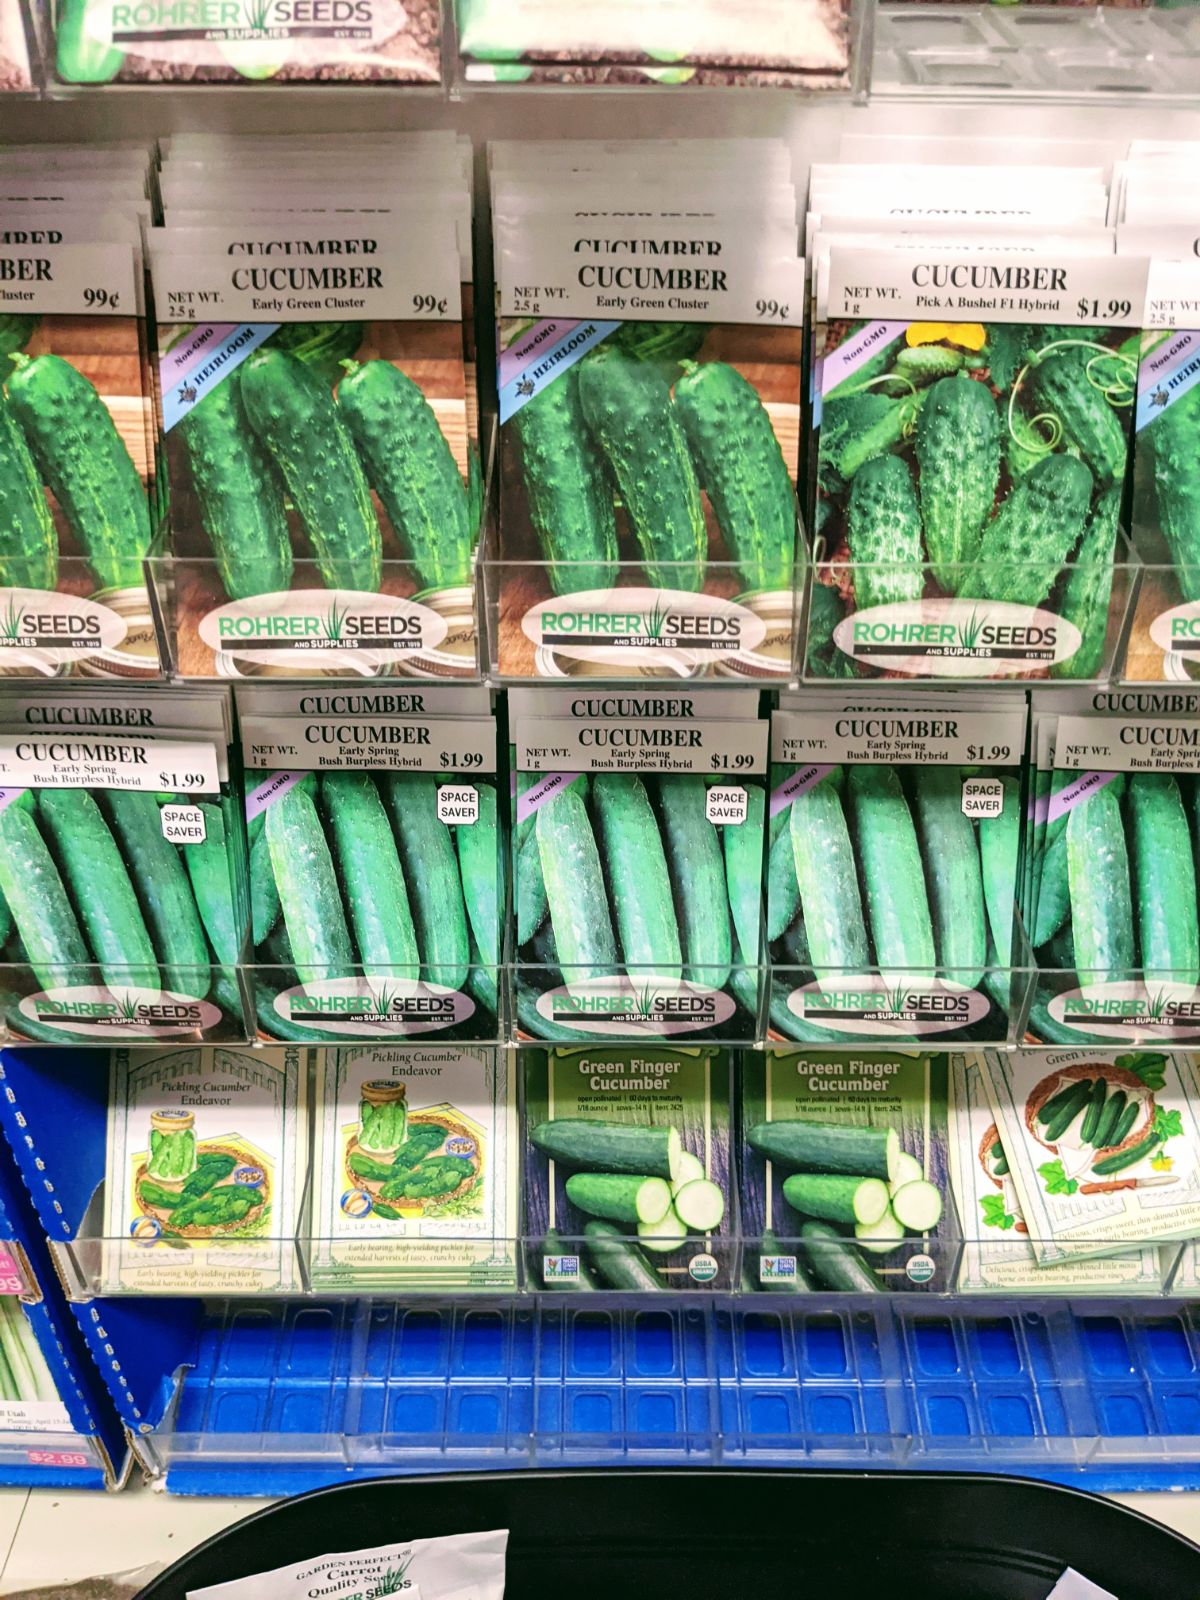 Variety of cucumber seed packets for sale at the store